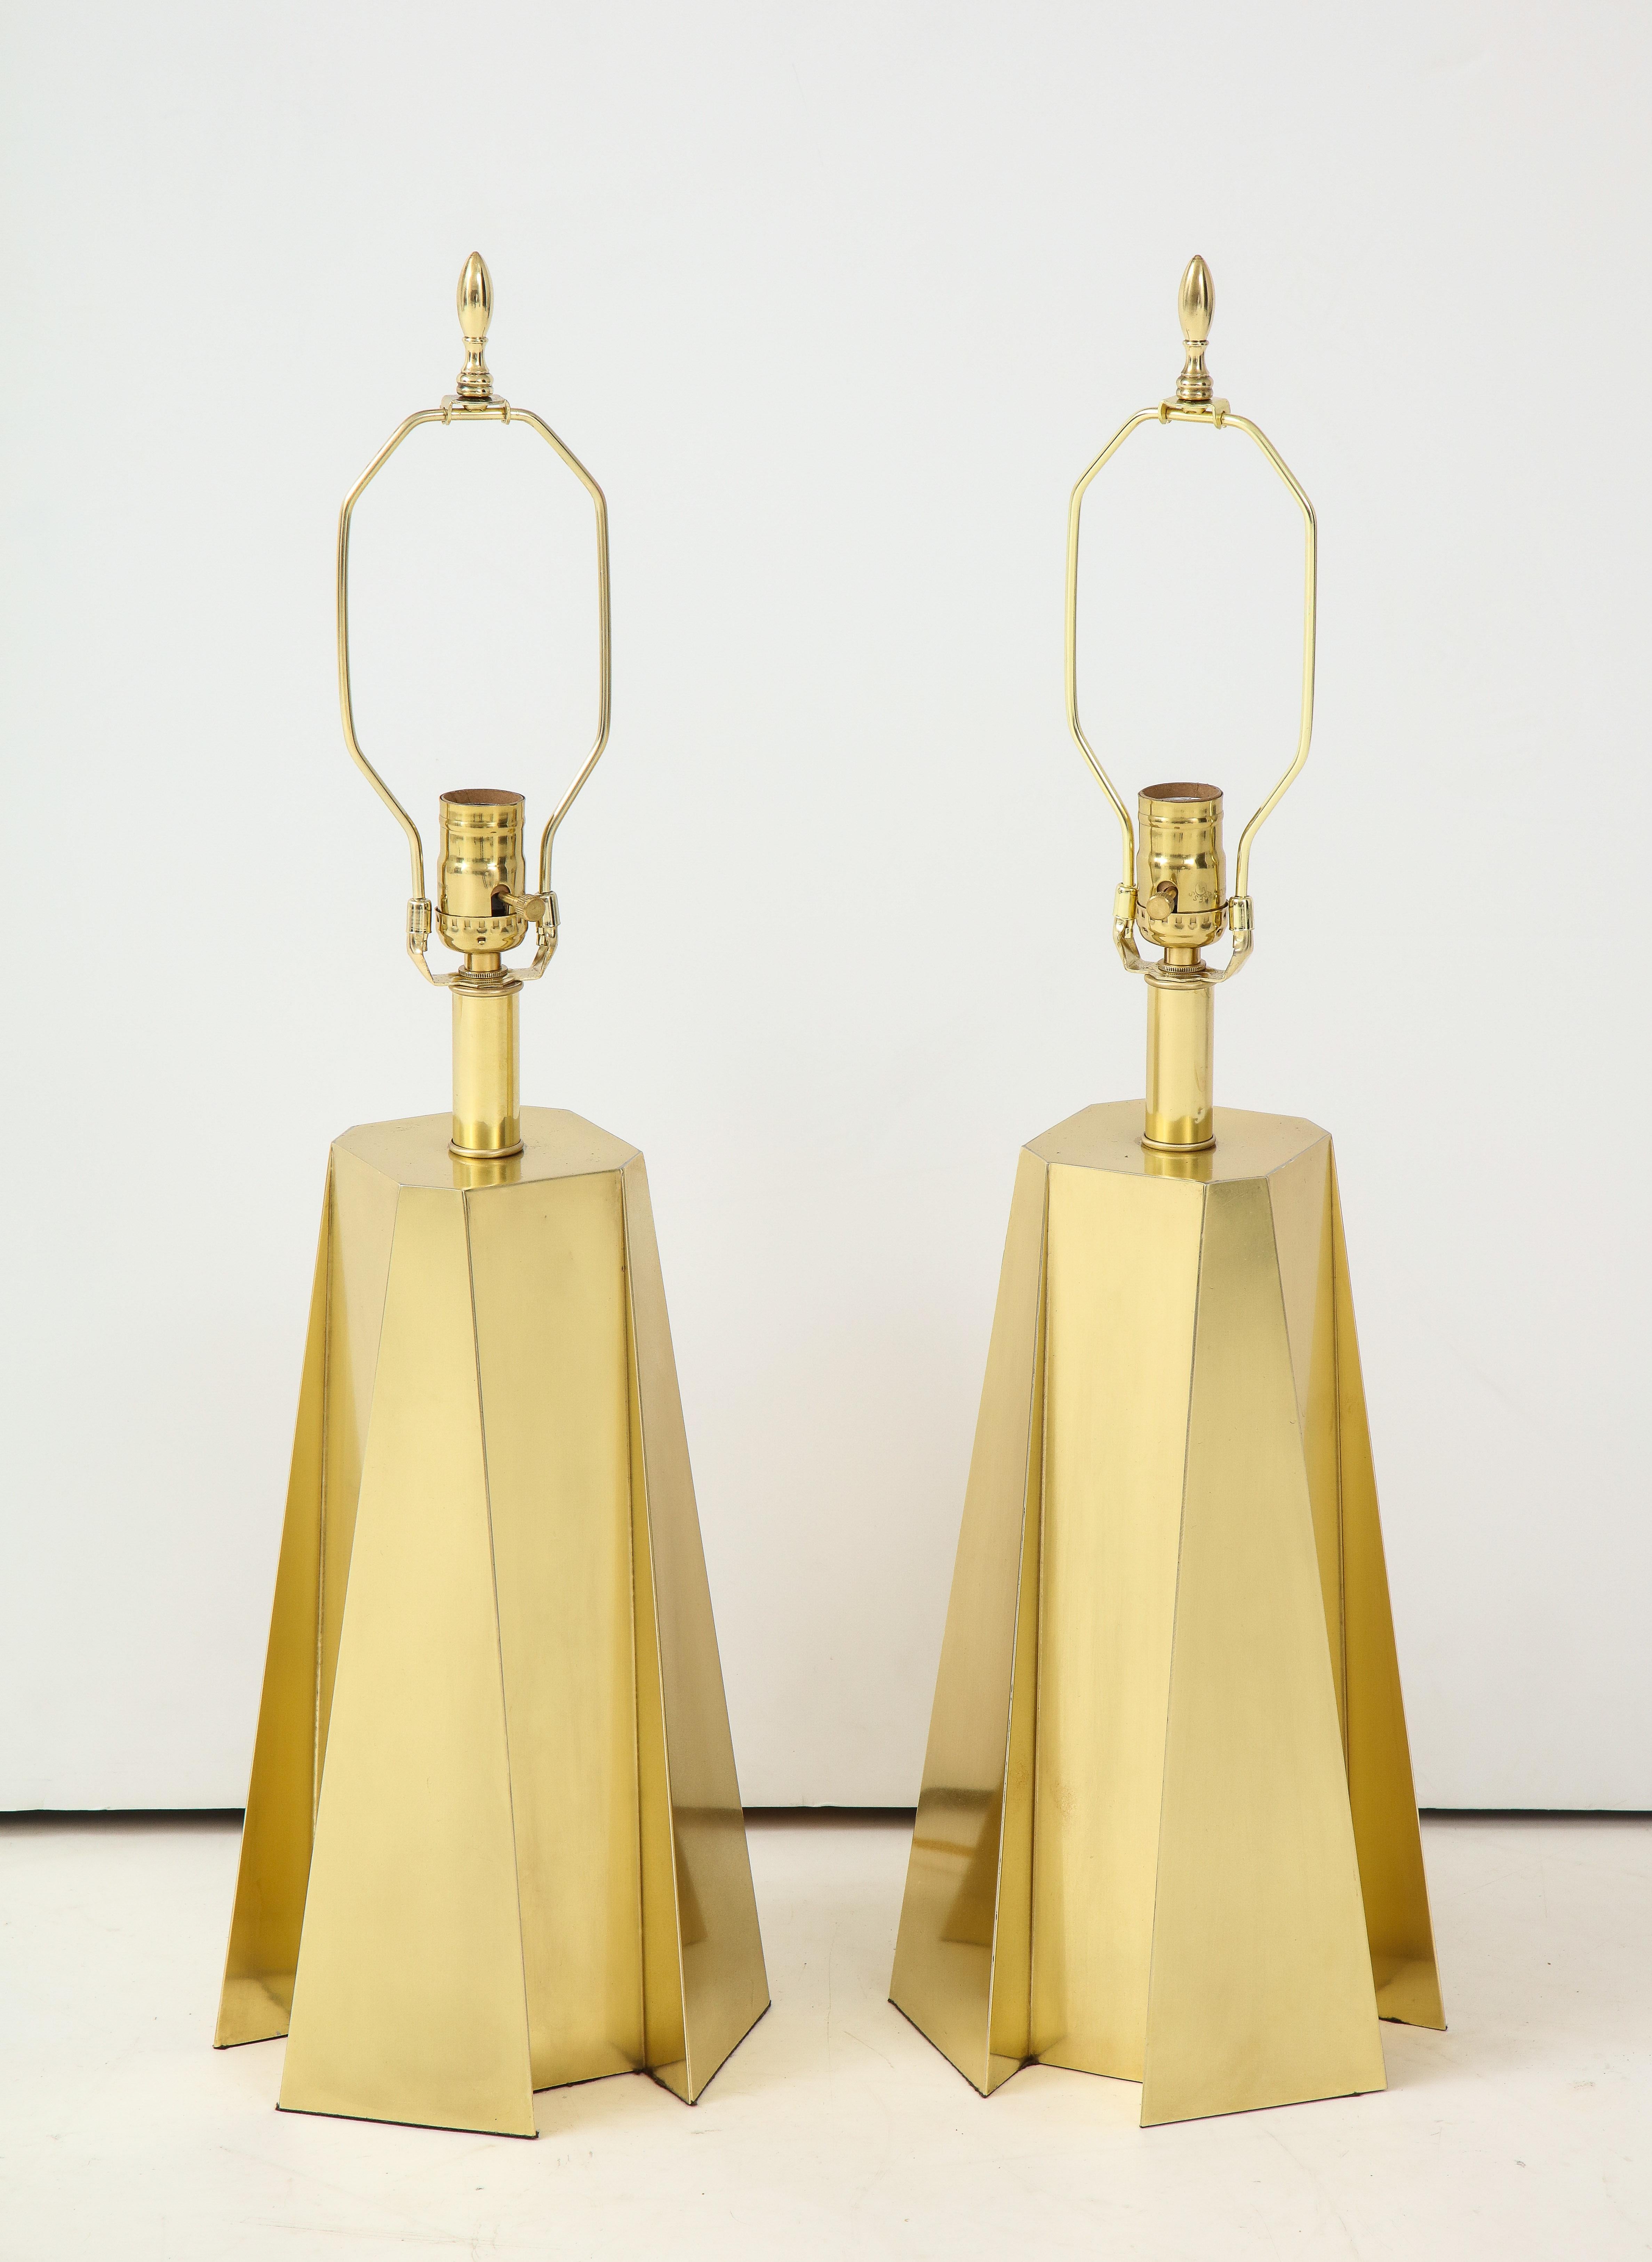 Stunning pair of 1970s Mid-Century Modern faceted brass table lamps, newly restored and rewired. Ready to use.